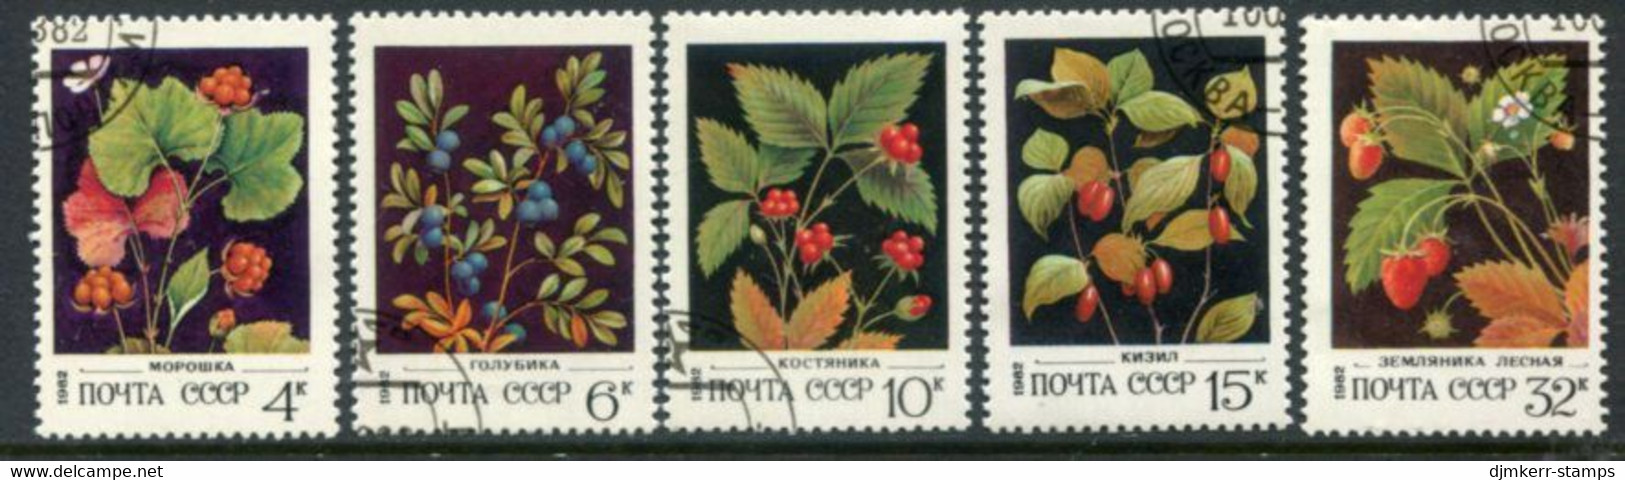 SOVIET UNION 1982 Wild Berries Used.  Michel 5155-59 - Used Stamps